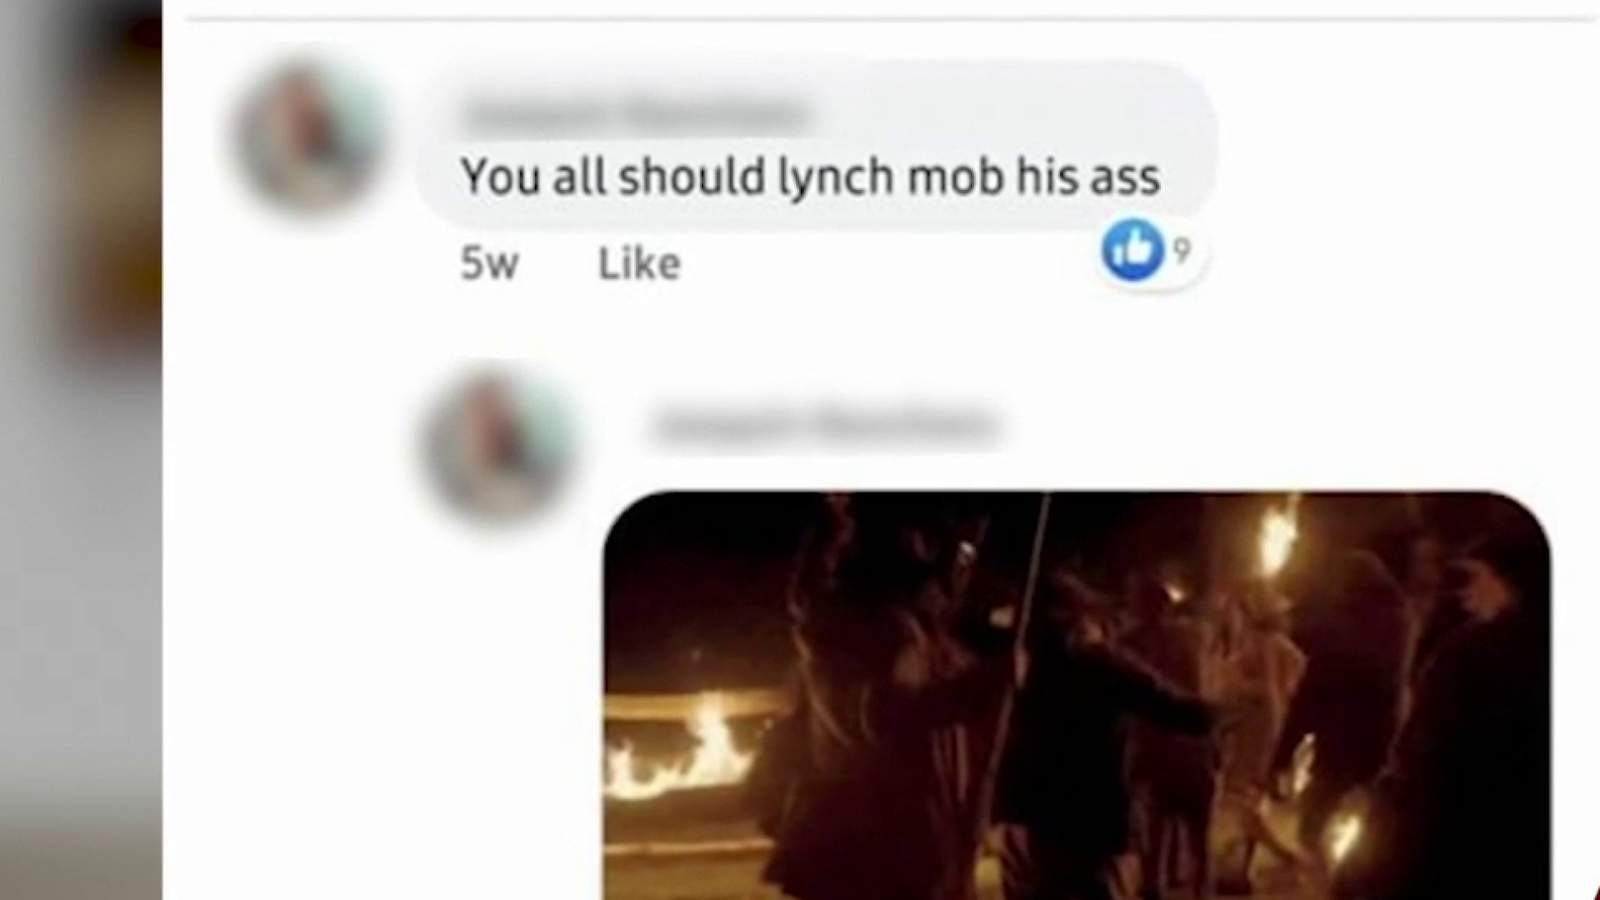 Lynch mob Facebook post under investigation by Bexar County Sheriffs Office